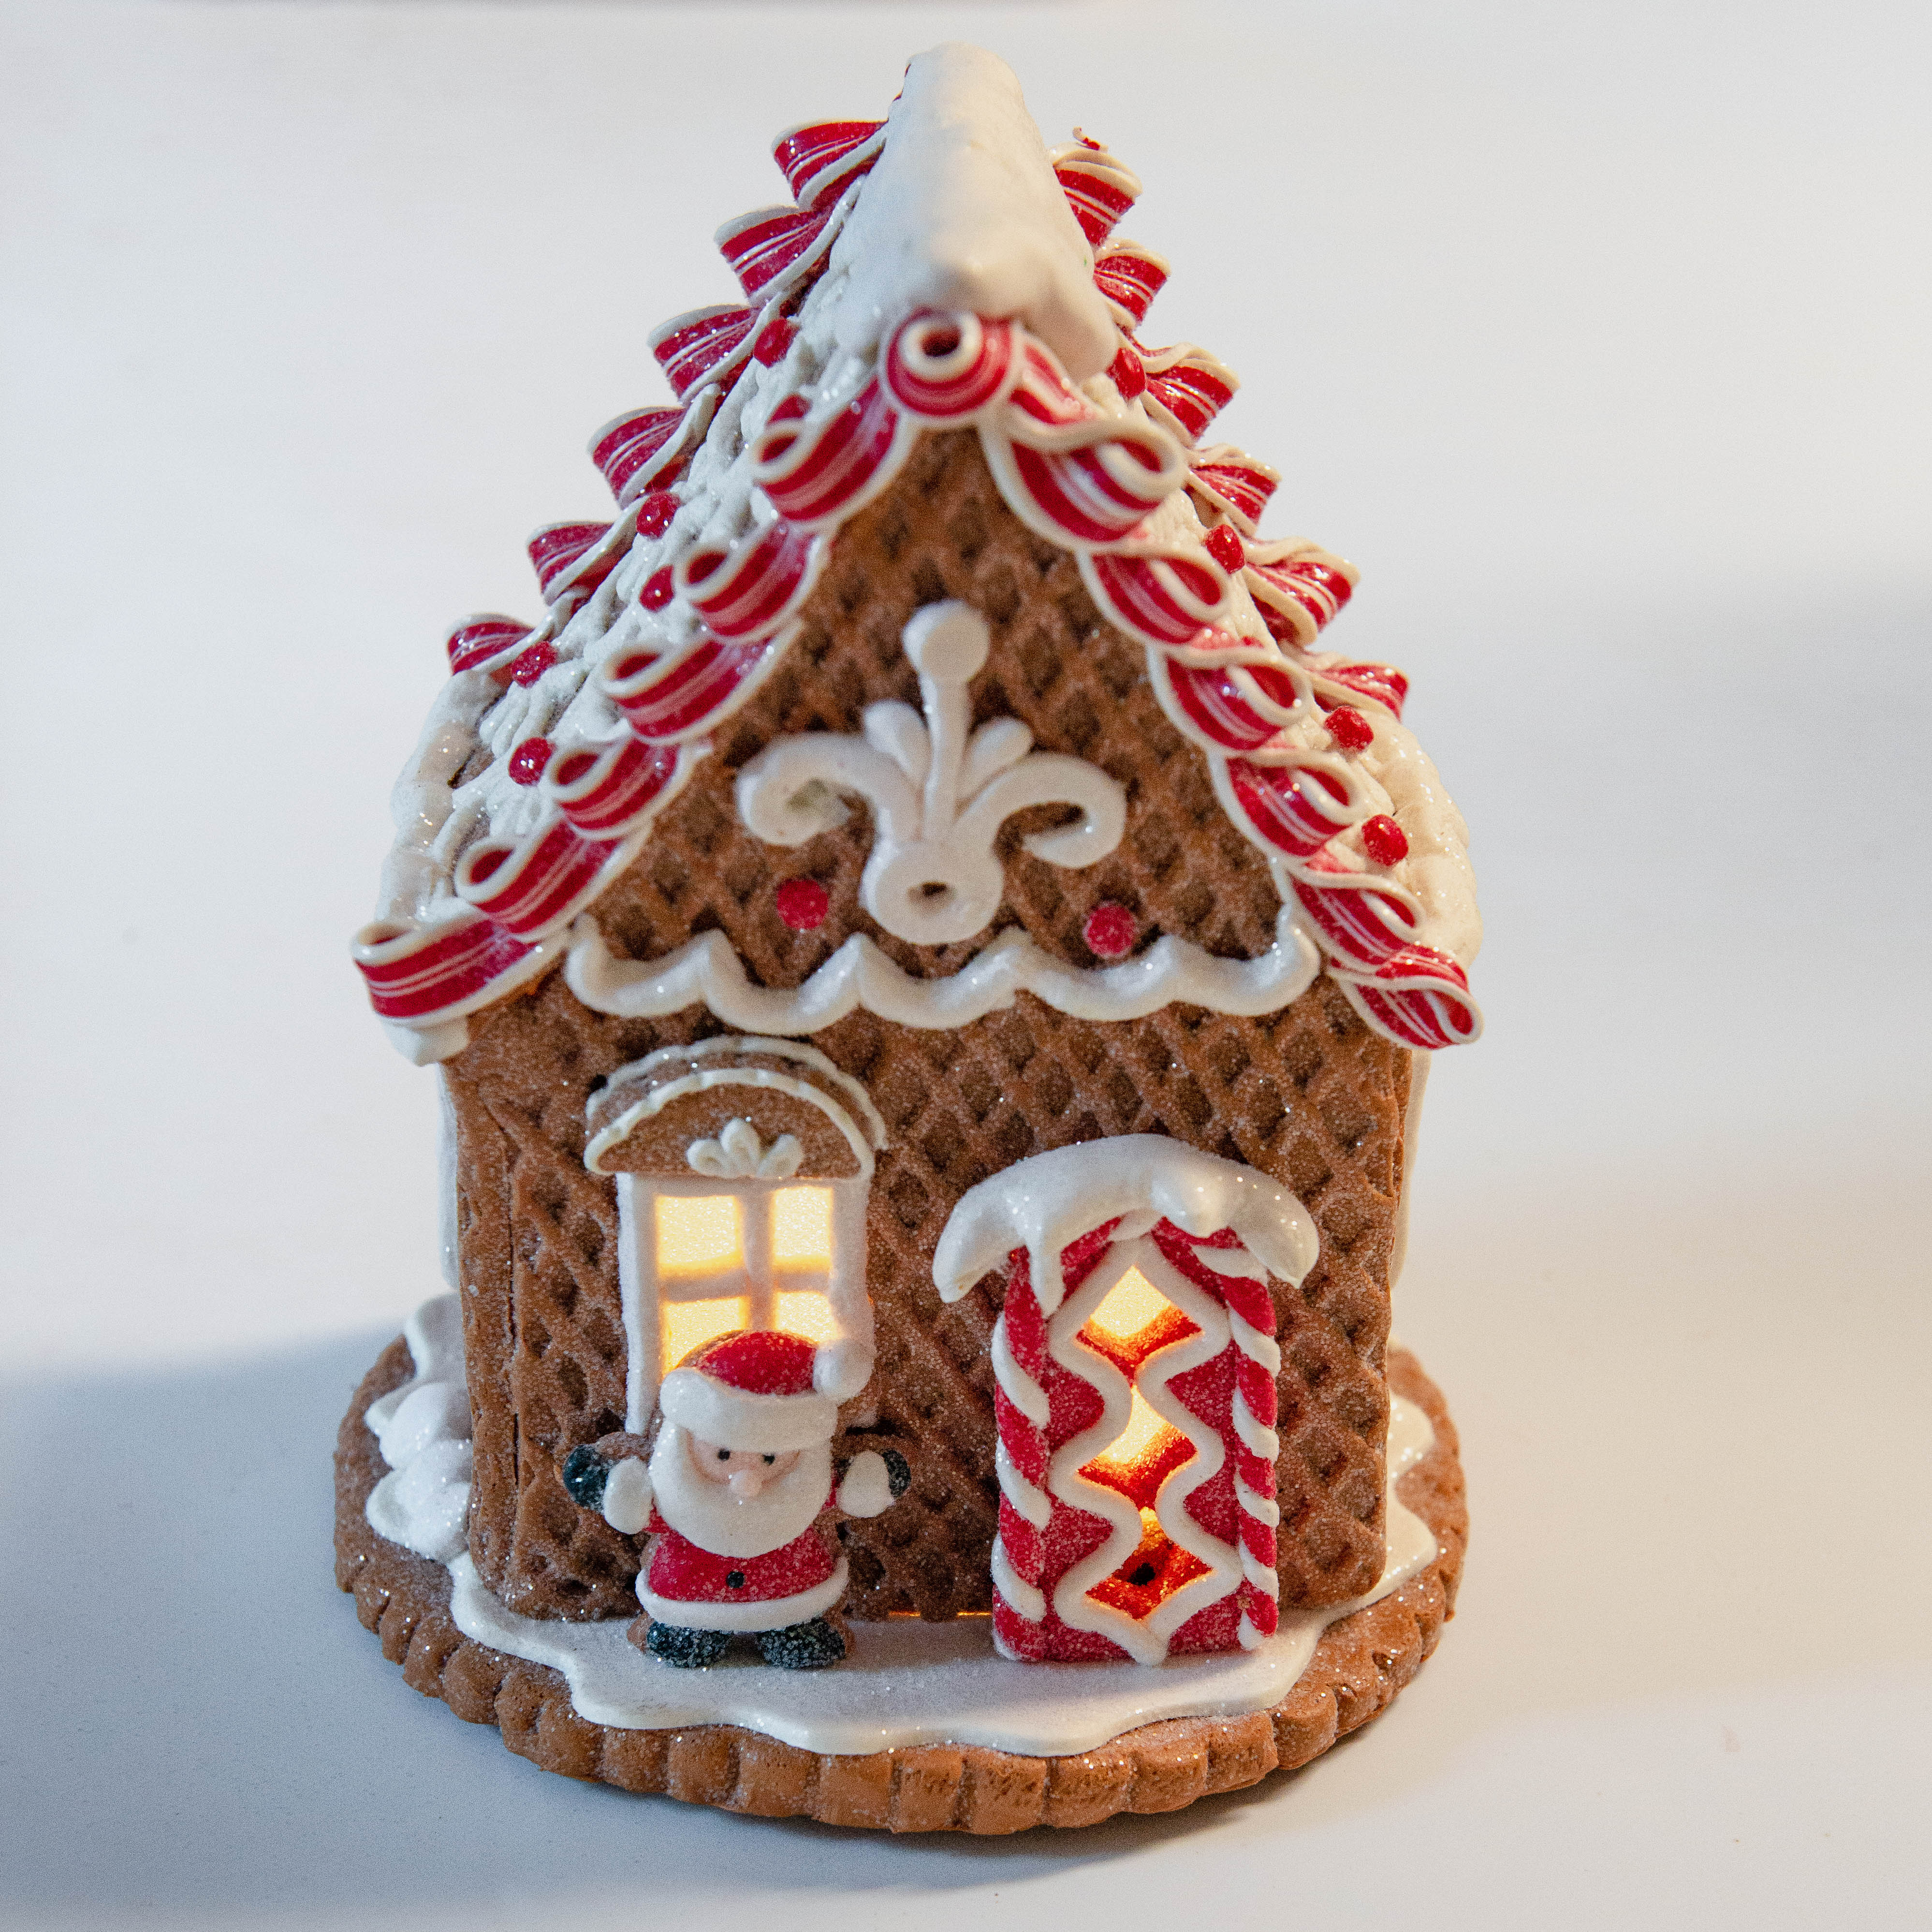 Light　Father　Grasmere　Gingerbread　Gingerbread　Up　Christmas　House